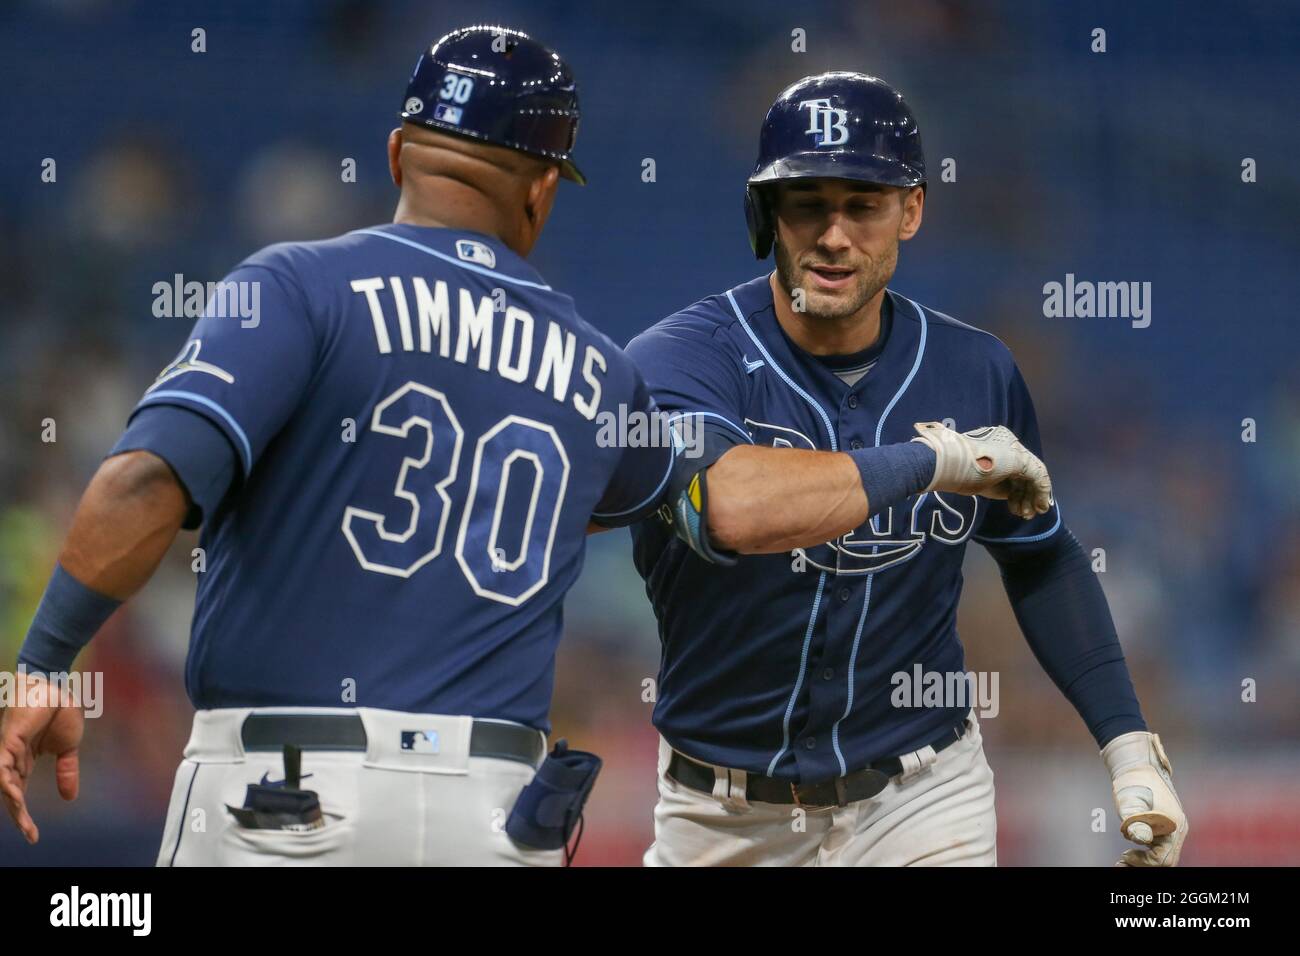 St petersburg fl usa tampa bay rays first base coach ozzie timmons elbow bumps center fielder kevin kiermaier after he singles in the b stock photo